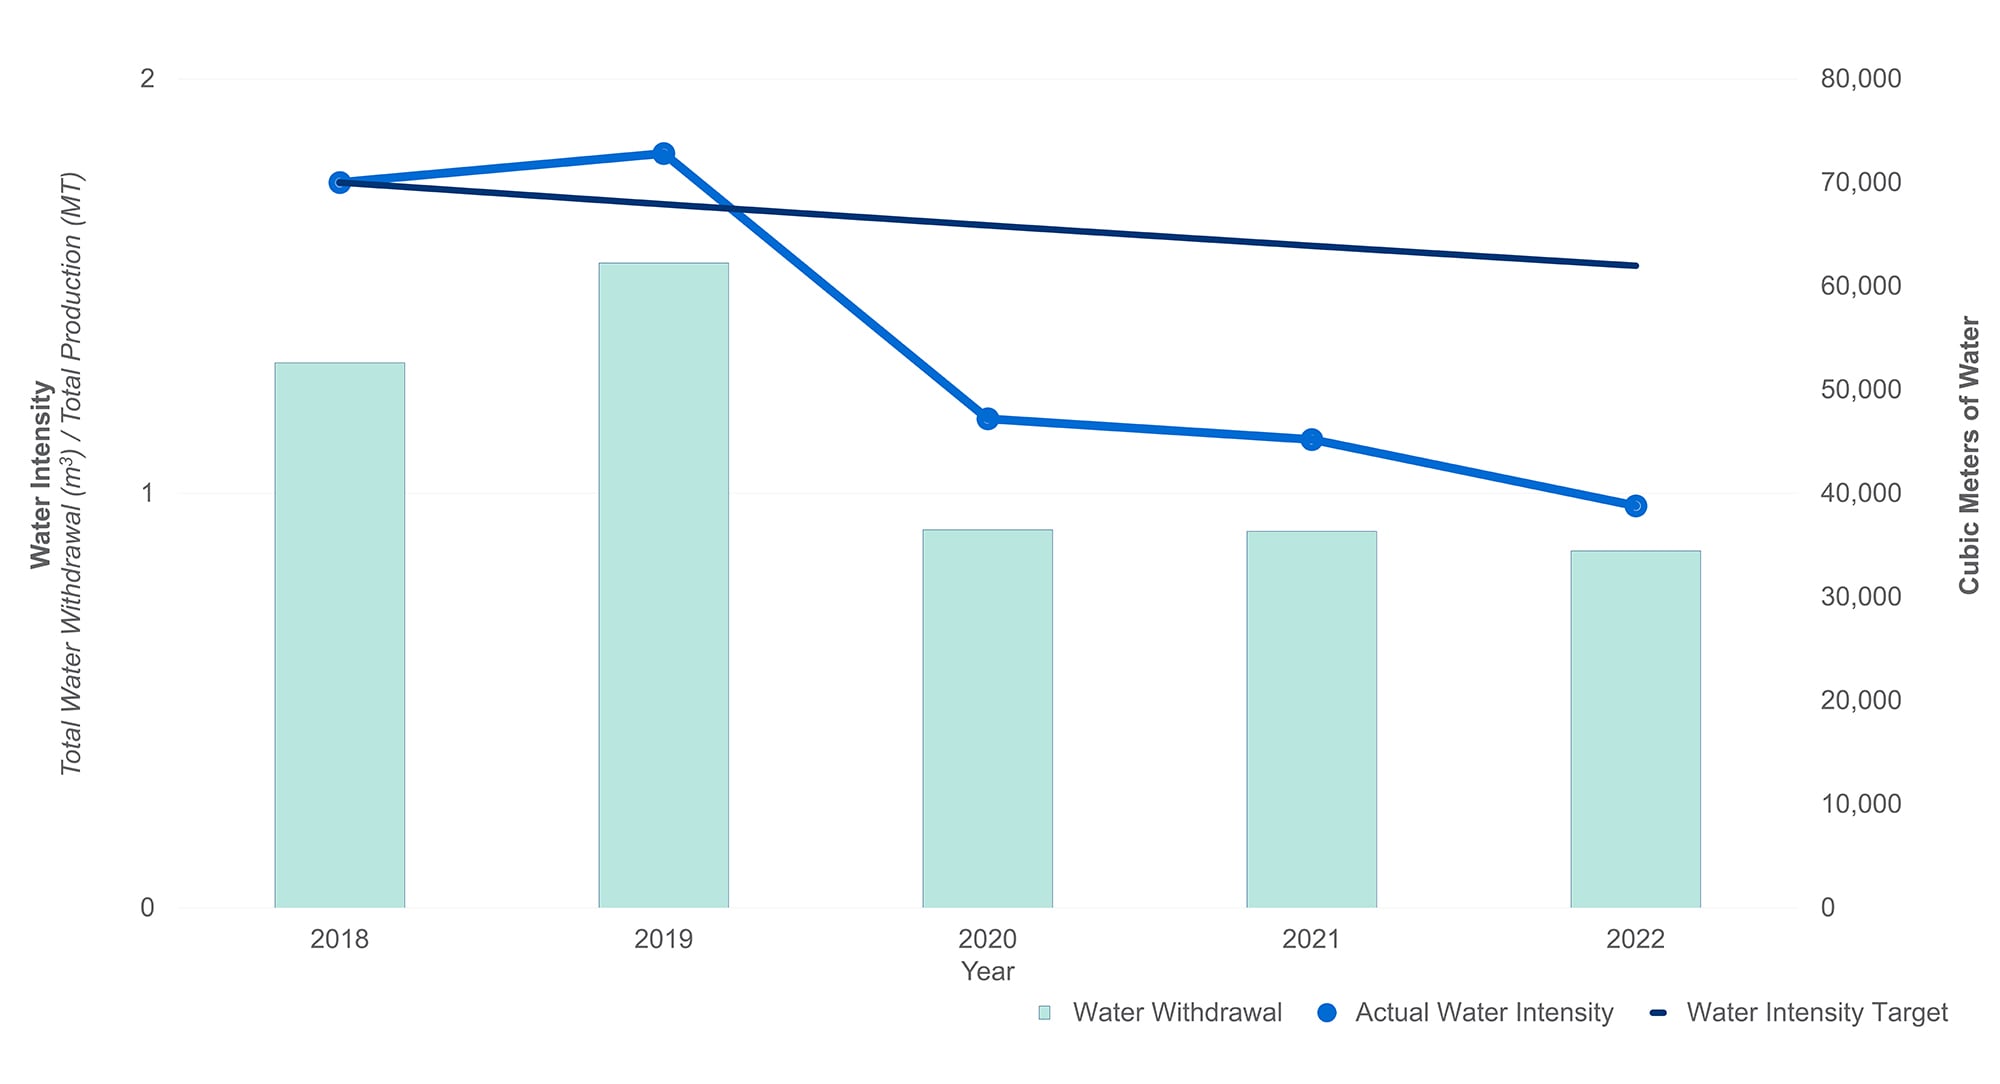 Chart of water intensity and water withdrawal at the Barueri plant from 2018-2022 with water intensity target: Water intensity Target (3% reduction year over year); Water Intensity Actuals (2018: 1.75; 2019: 1.82; 2020: 1.18; 2021: 1.13; 2022: 0.97); Water withdrawal cubic meters (2018: 52,607; 2019: 62,239; 2020: 36,490; 2021: 36,335; 2022: 34,466)